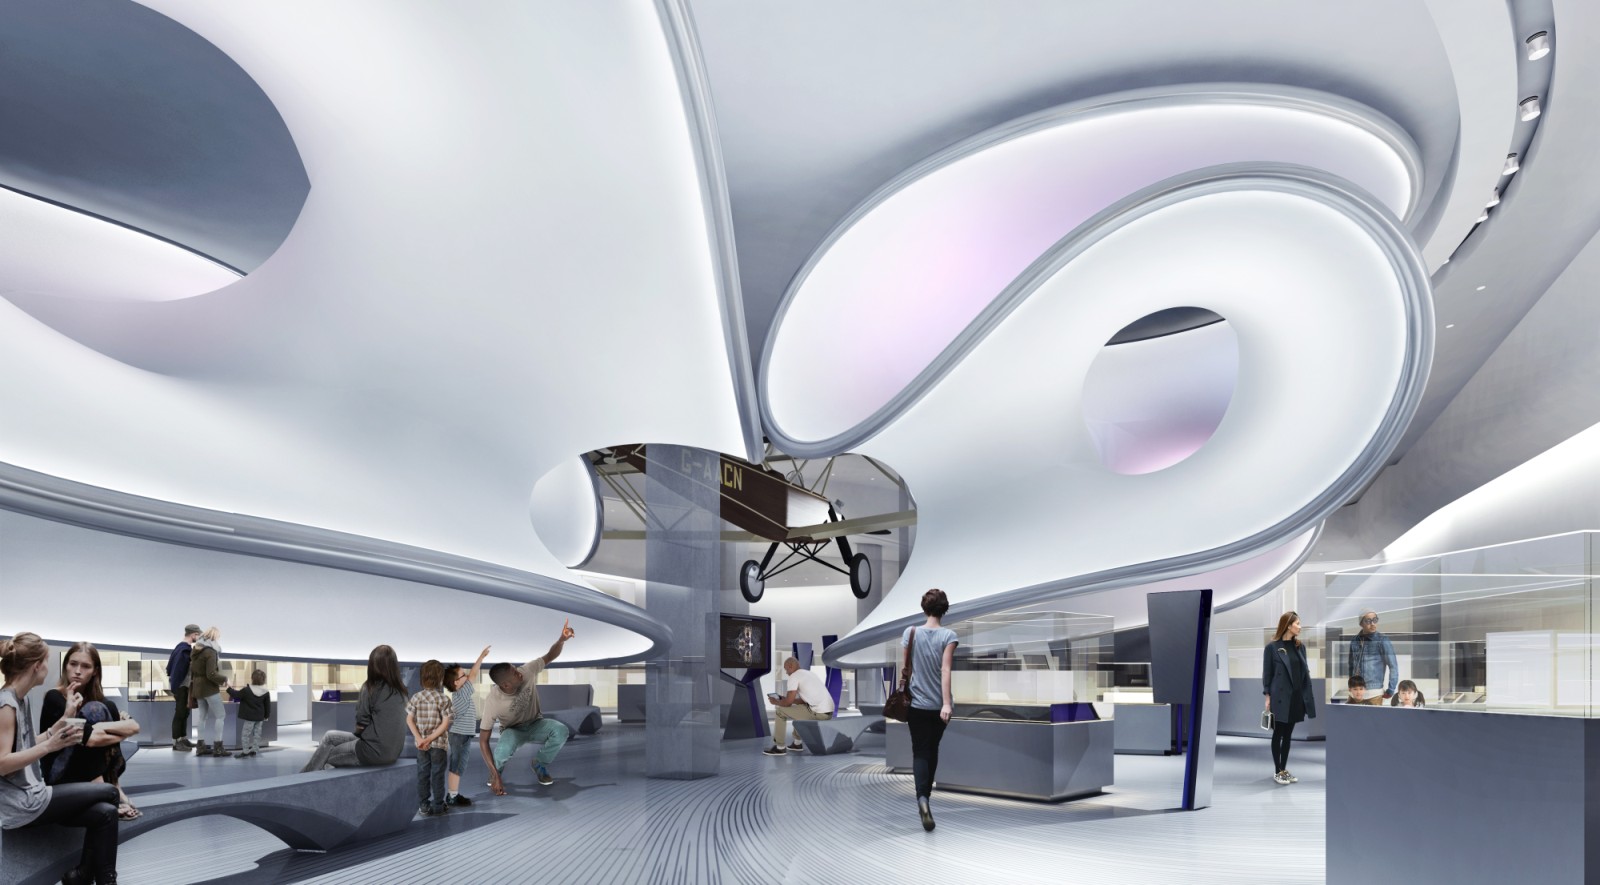 Mathematics Gallery Science Museum by Zaha Hadid | A As Architecture